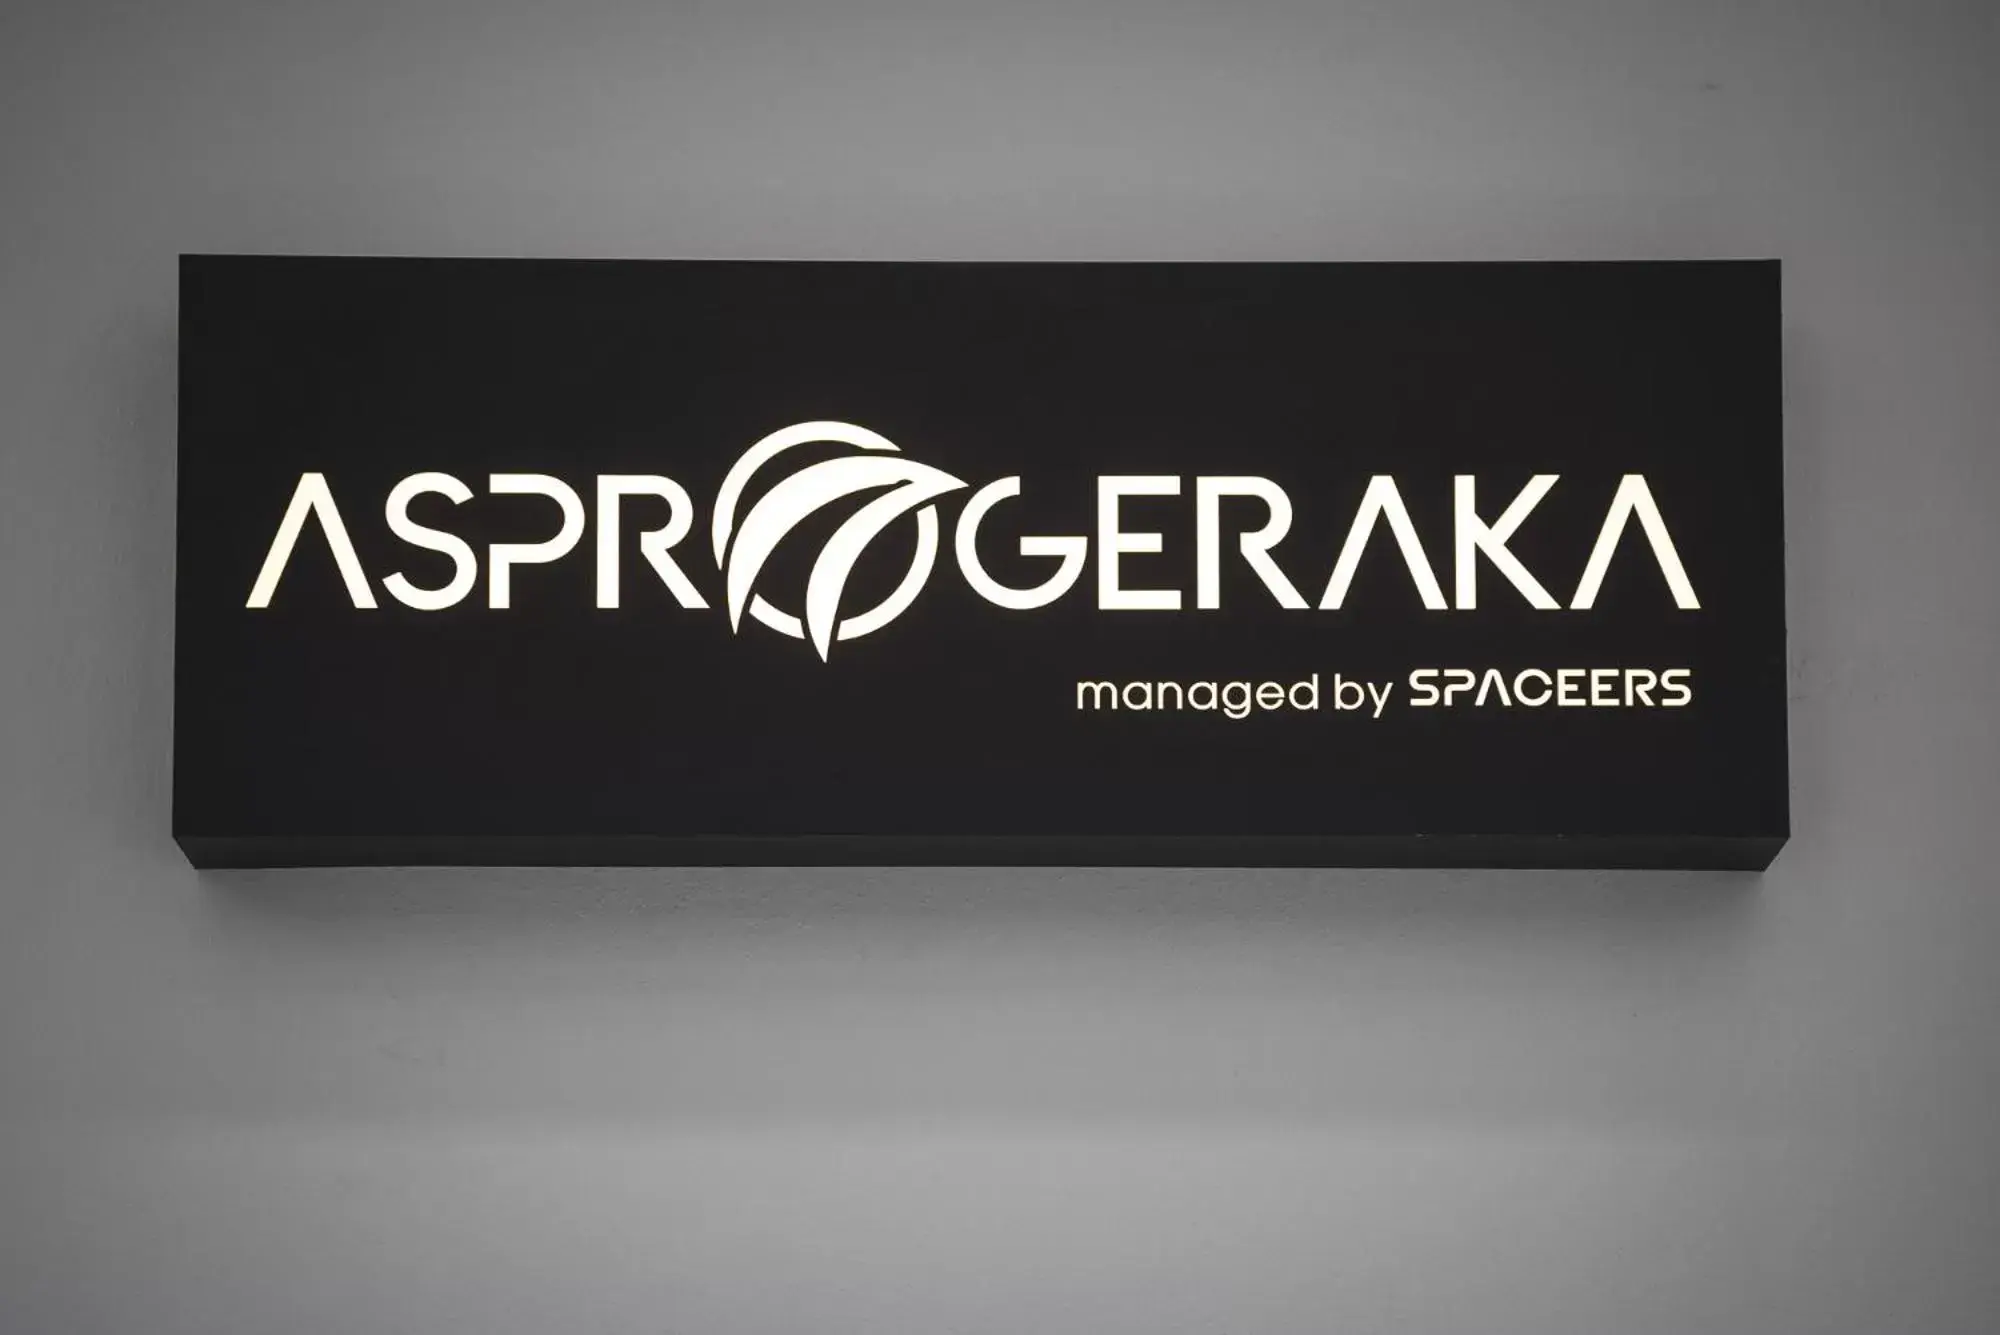 Property logo or sign in The Asprogeraka - self check-in rooms